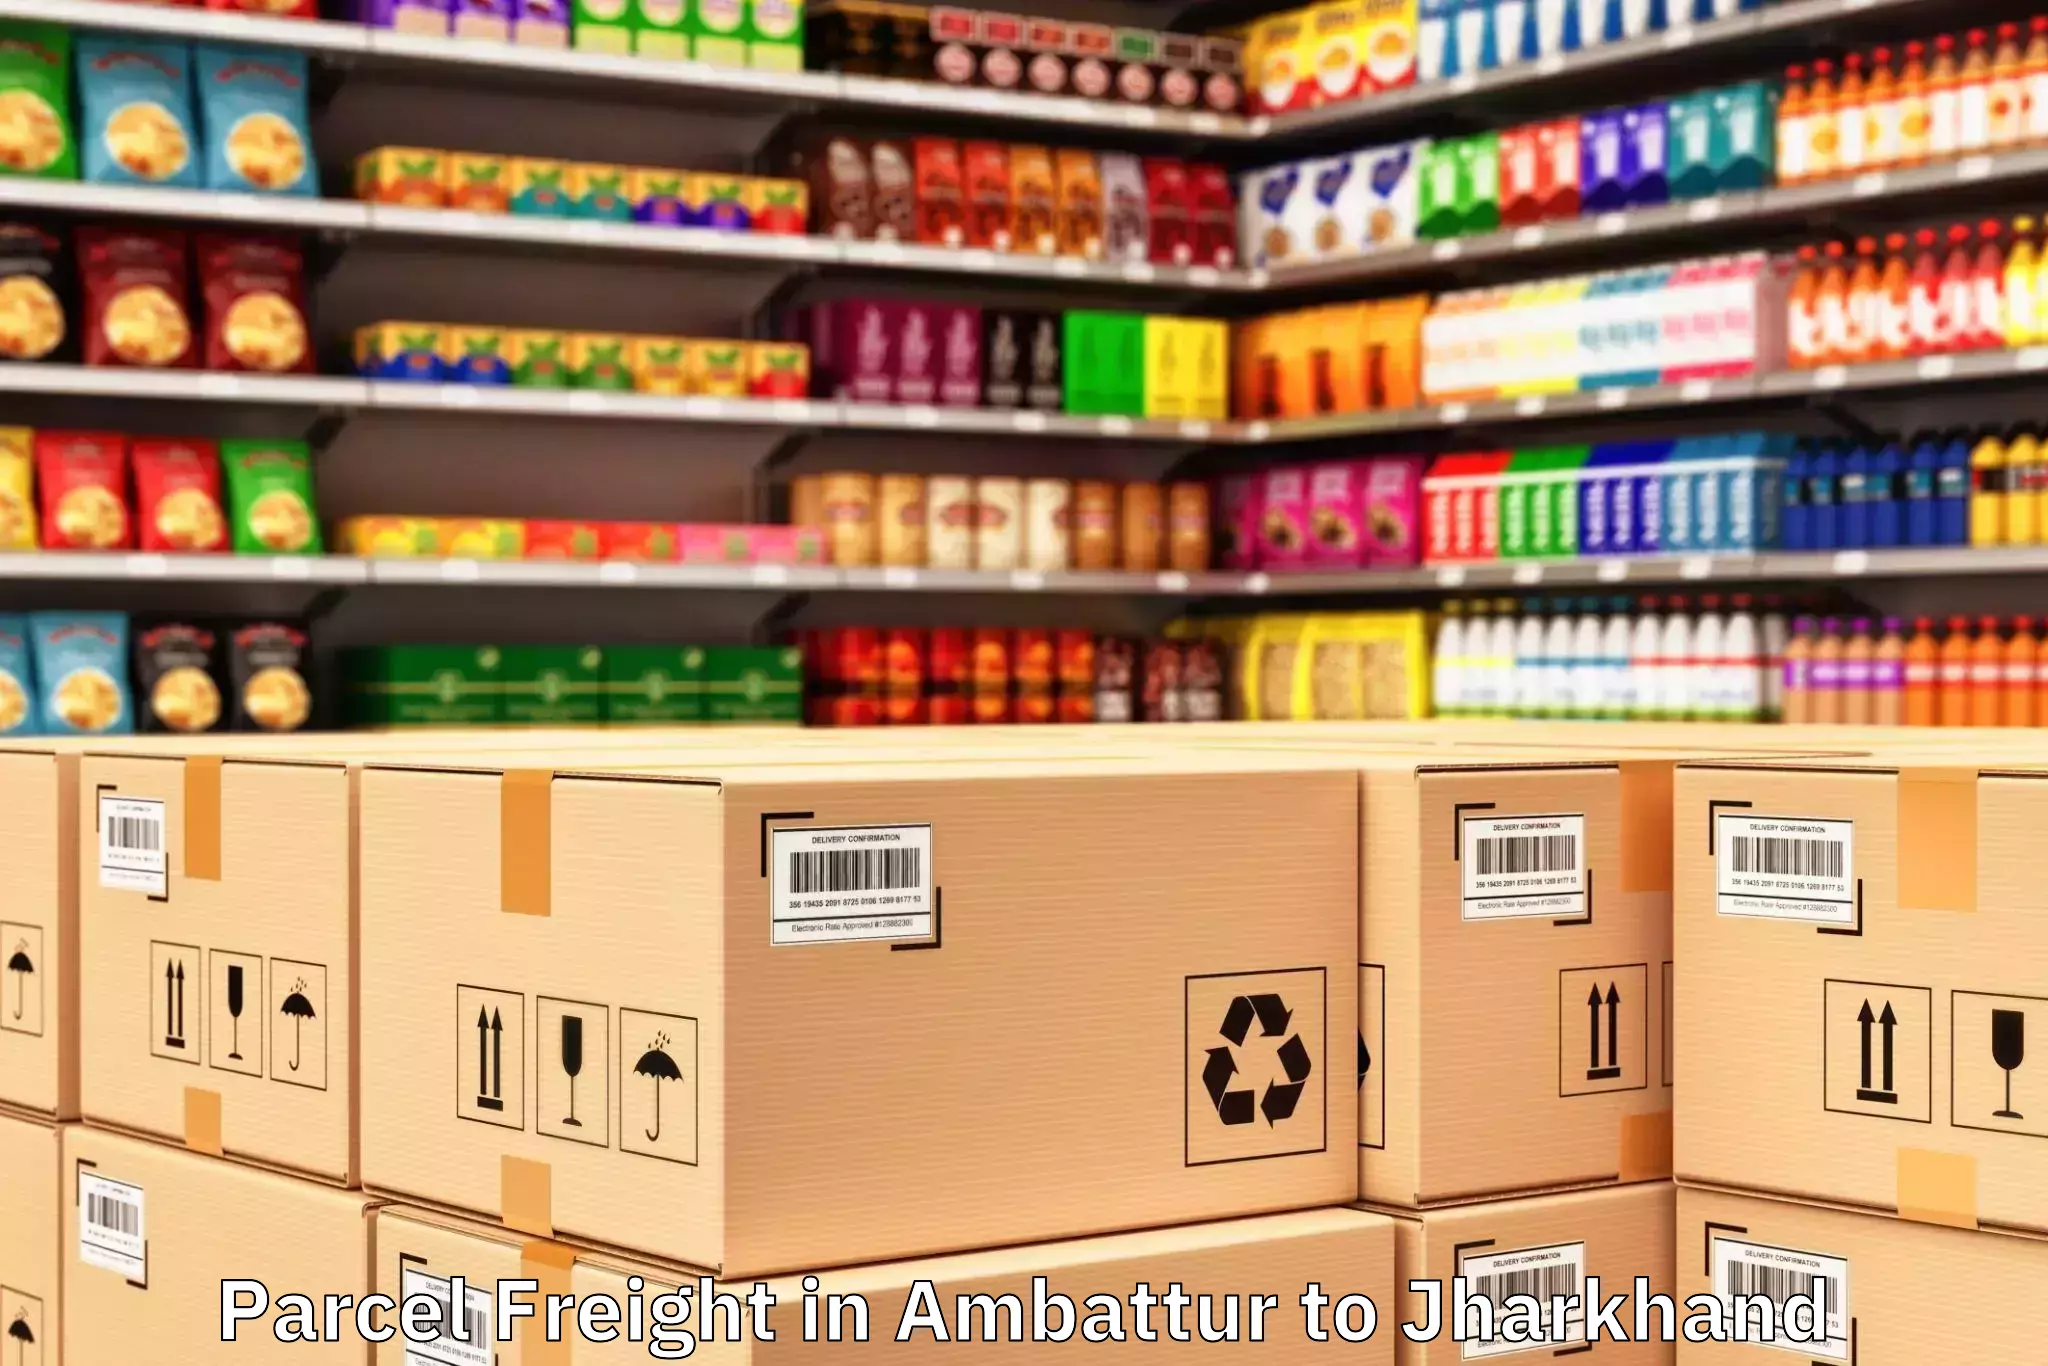 Get Ambattur to Chatra Parcel Freight